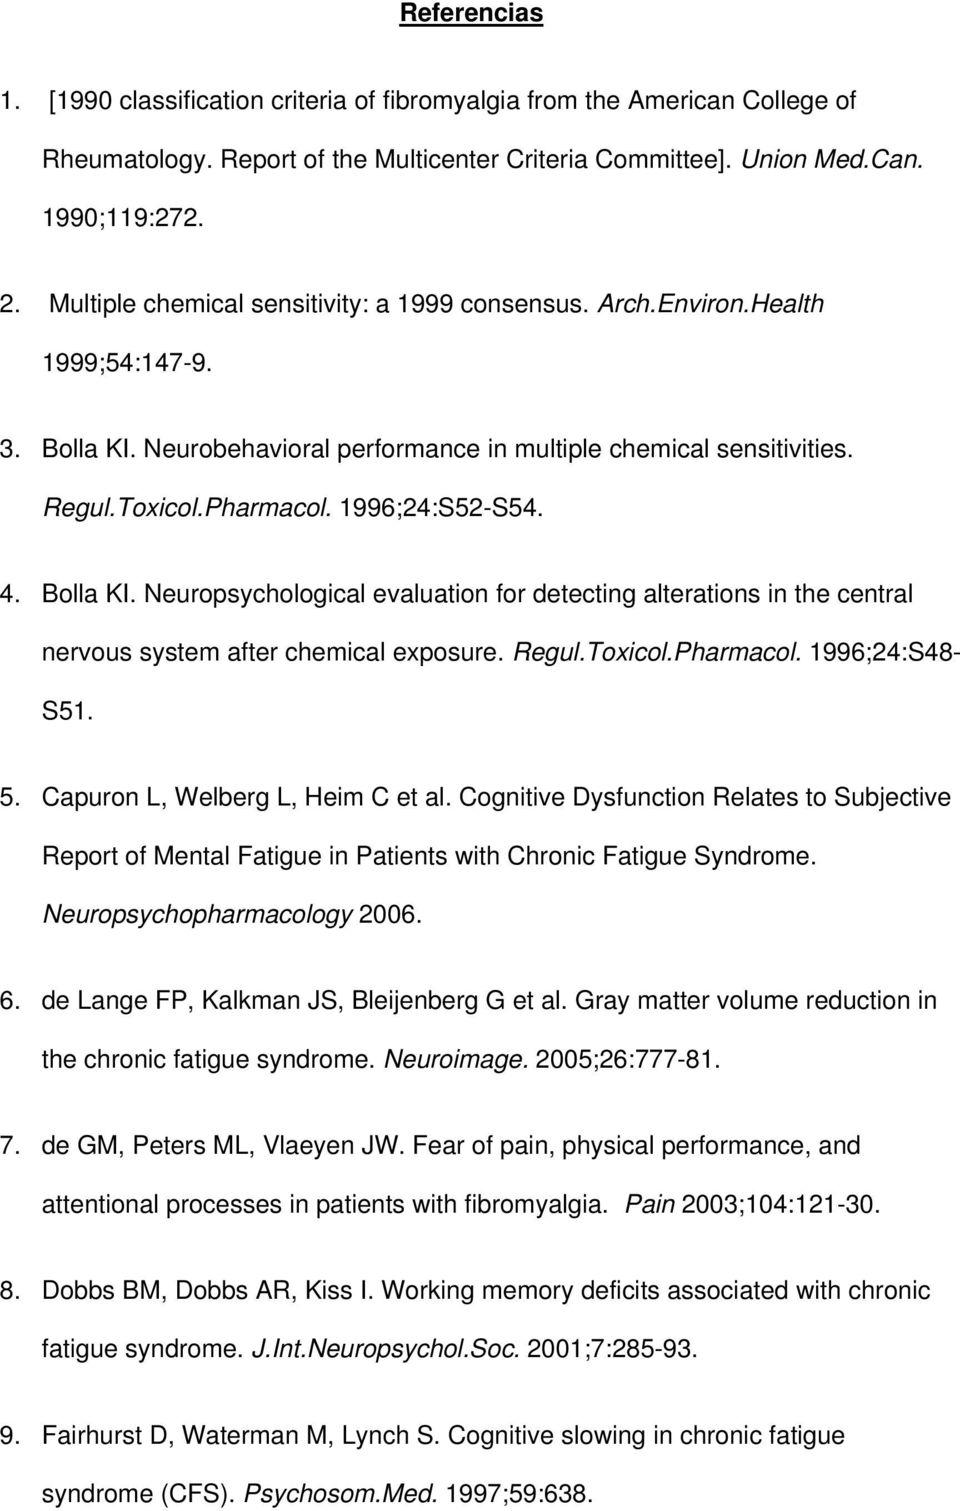 1996;24:S52-S54. 4. Bolla KI. Neuropsychological evaluation for detecting alterations in the central nervous system after chemical exposure. Regul.Toxicol.Pharmacol. 1996;24:S48- S51. 5.